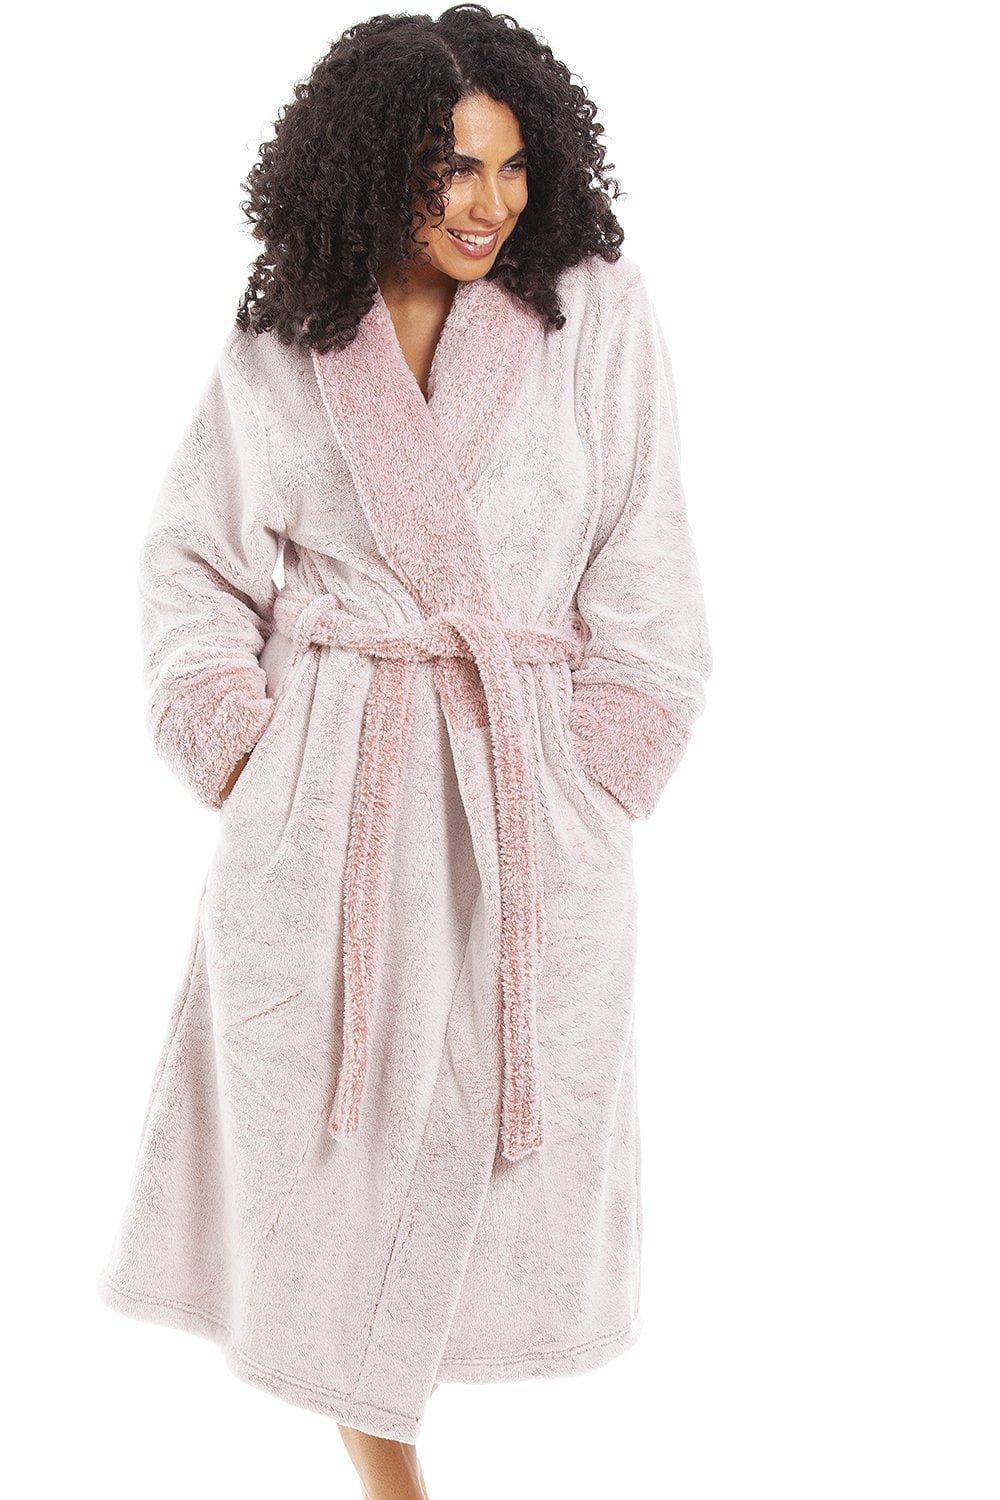 Ladies Plum Personalised Soft Fleece Velour Dressing Gown - Back  Personalised - The Luxury Gown Company